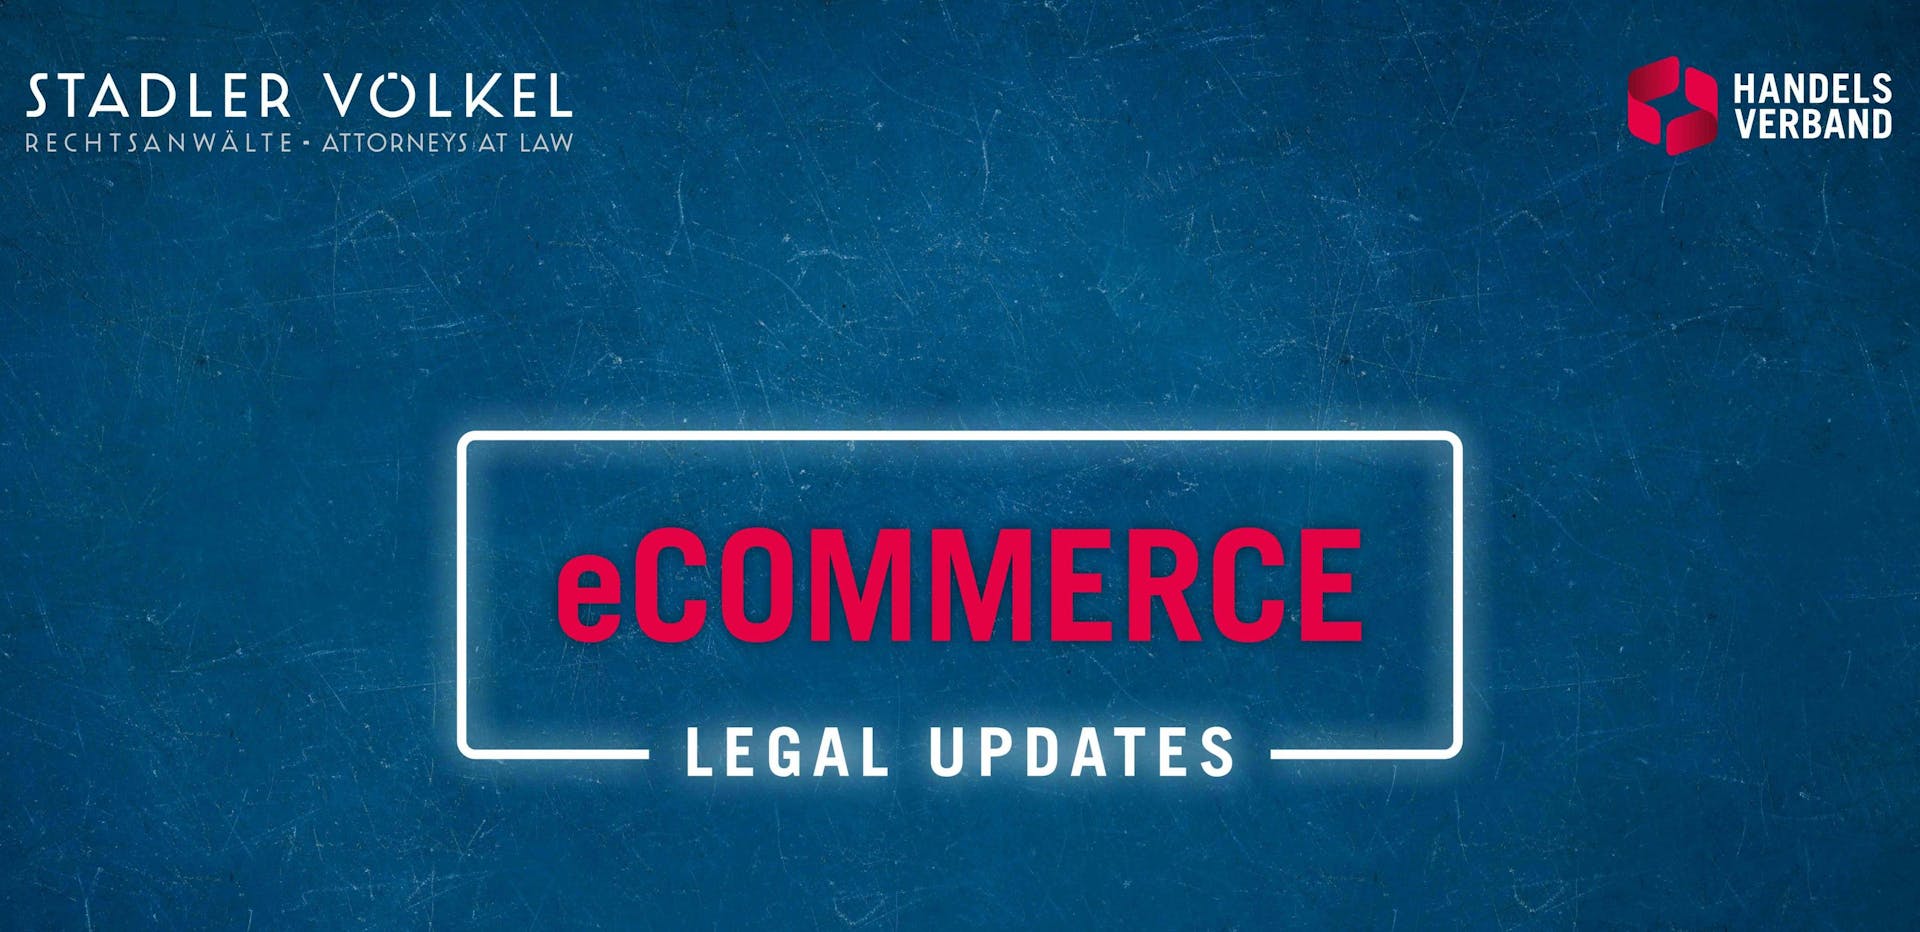 Legal Update #4: Impact of the future Omnibus Directive on (online) retailers